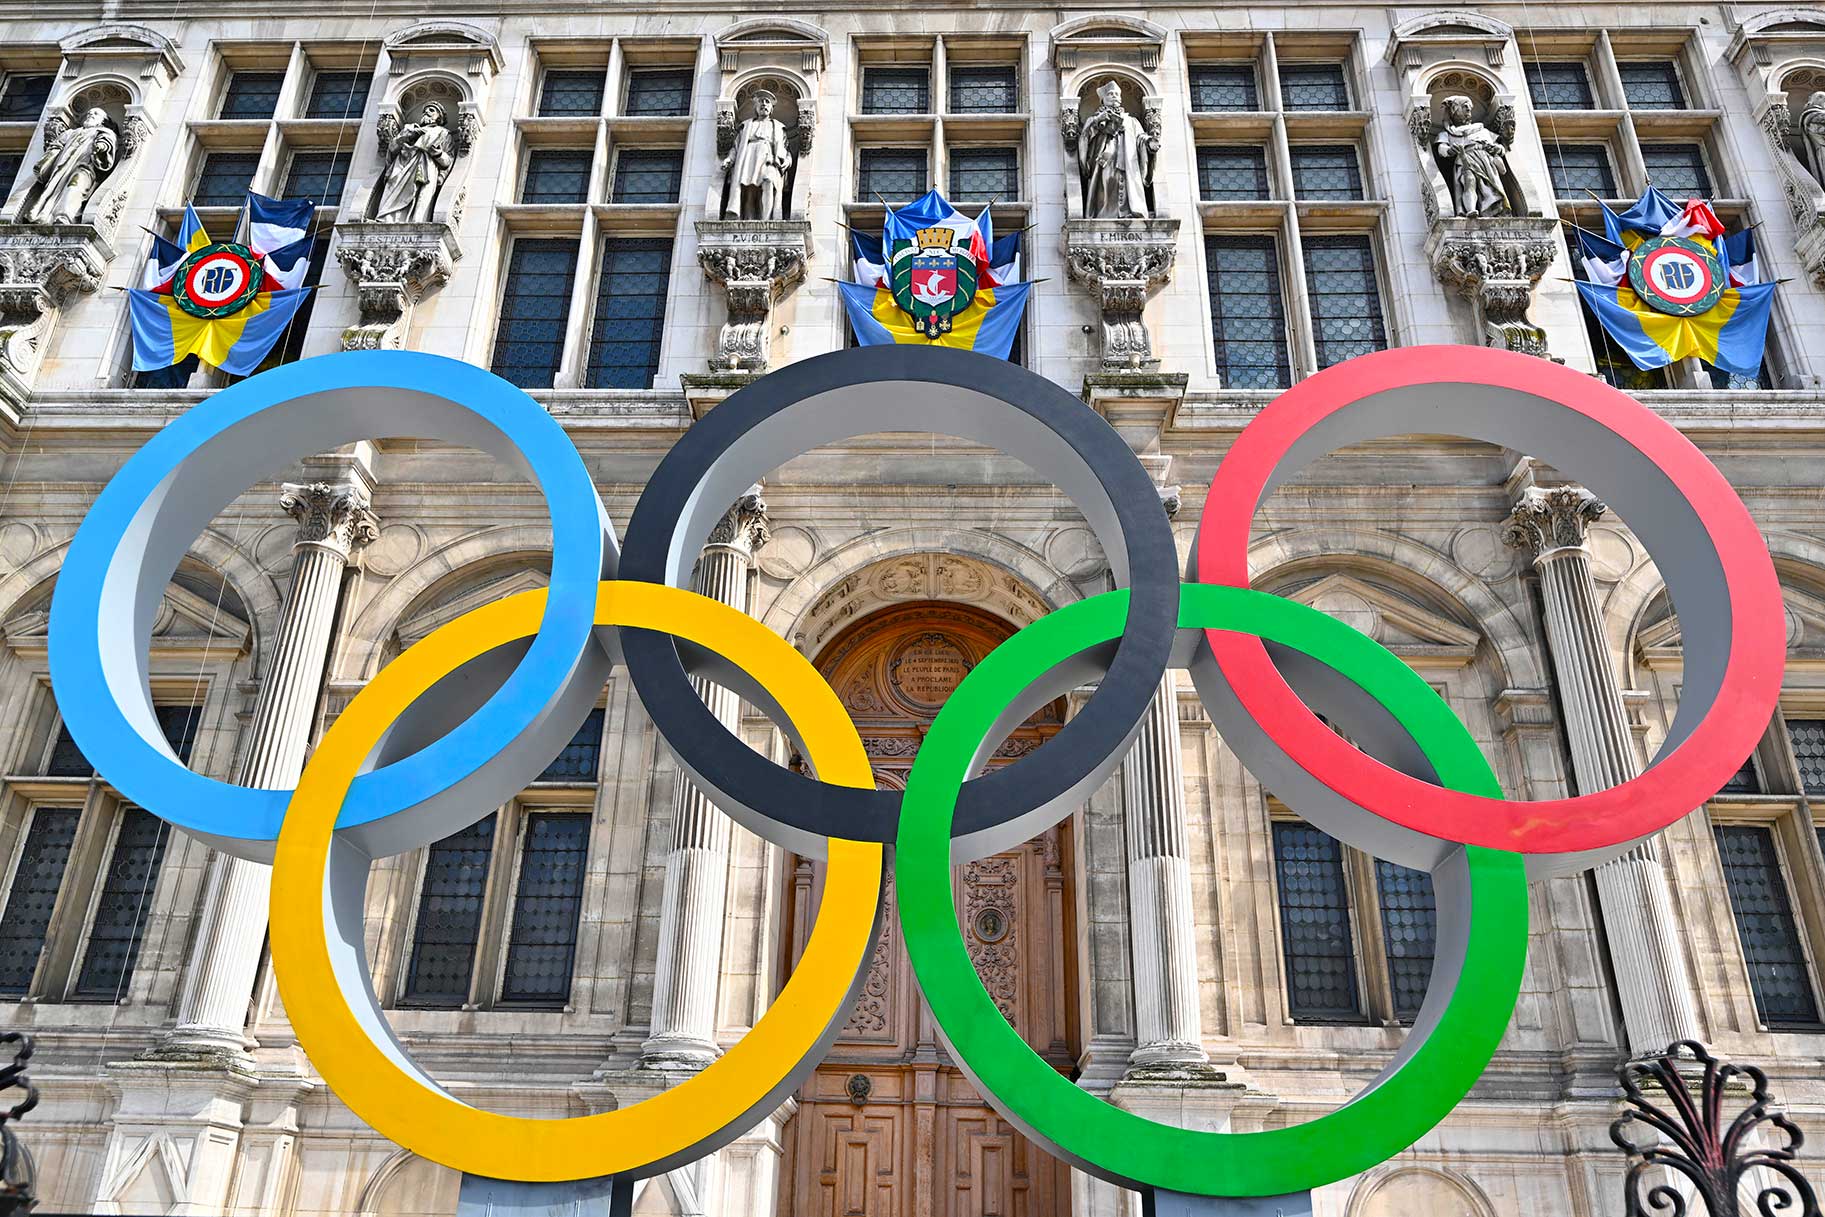 Olympic Rings display in front of the Paris City Hall.